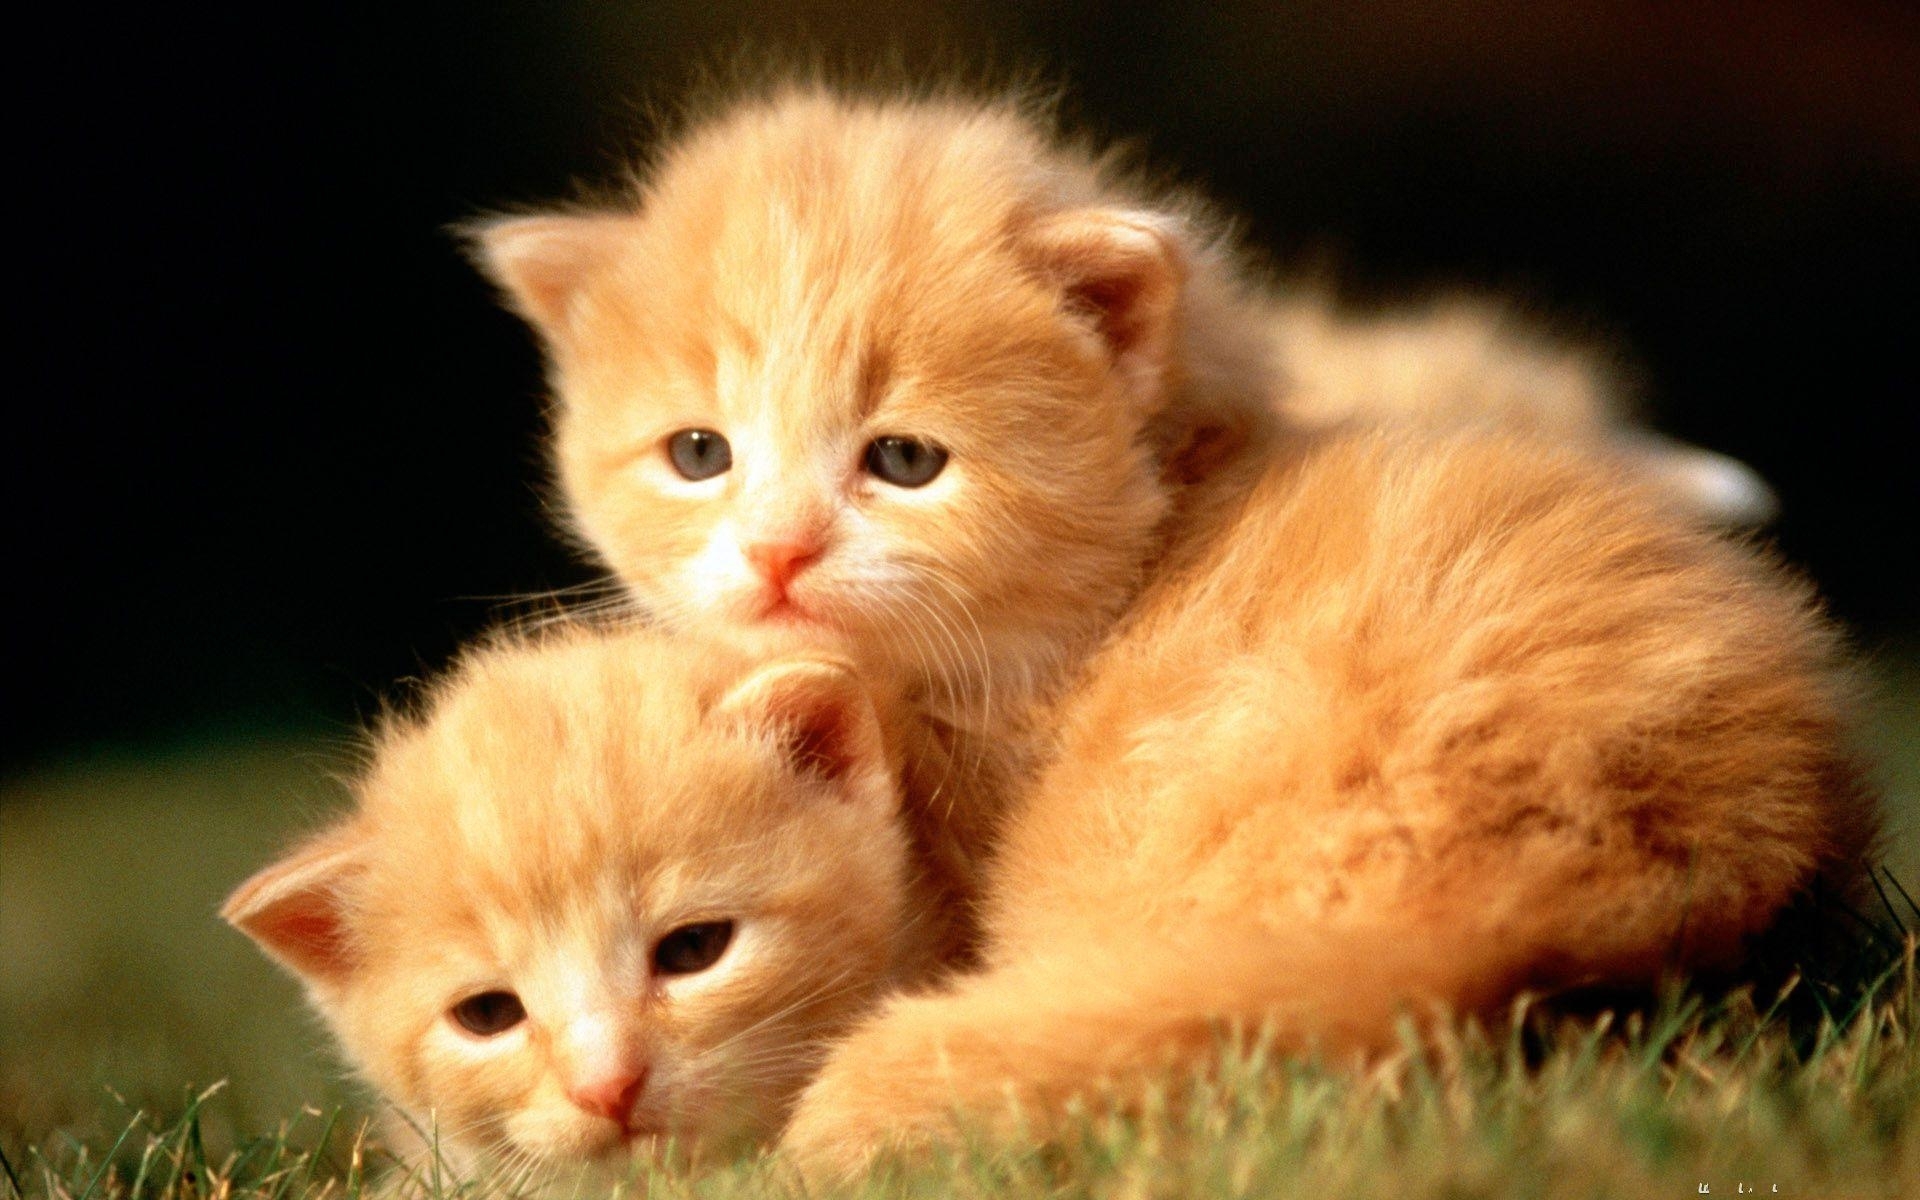 10 Top Cute Baby Animal Wallpapers Desktop FULL HD 1920×1080 For PC Background